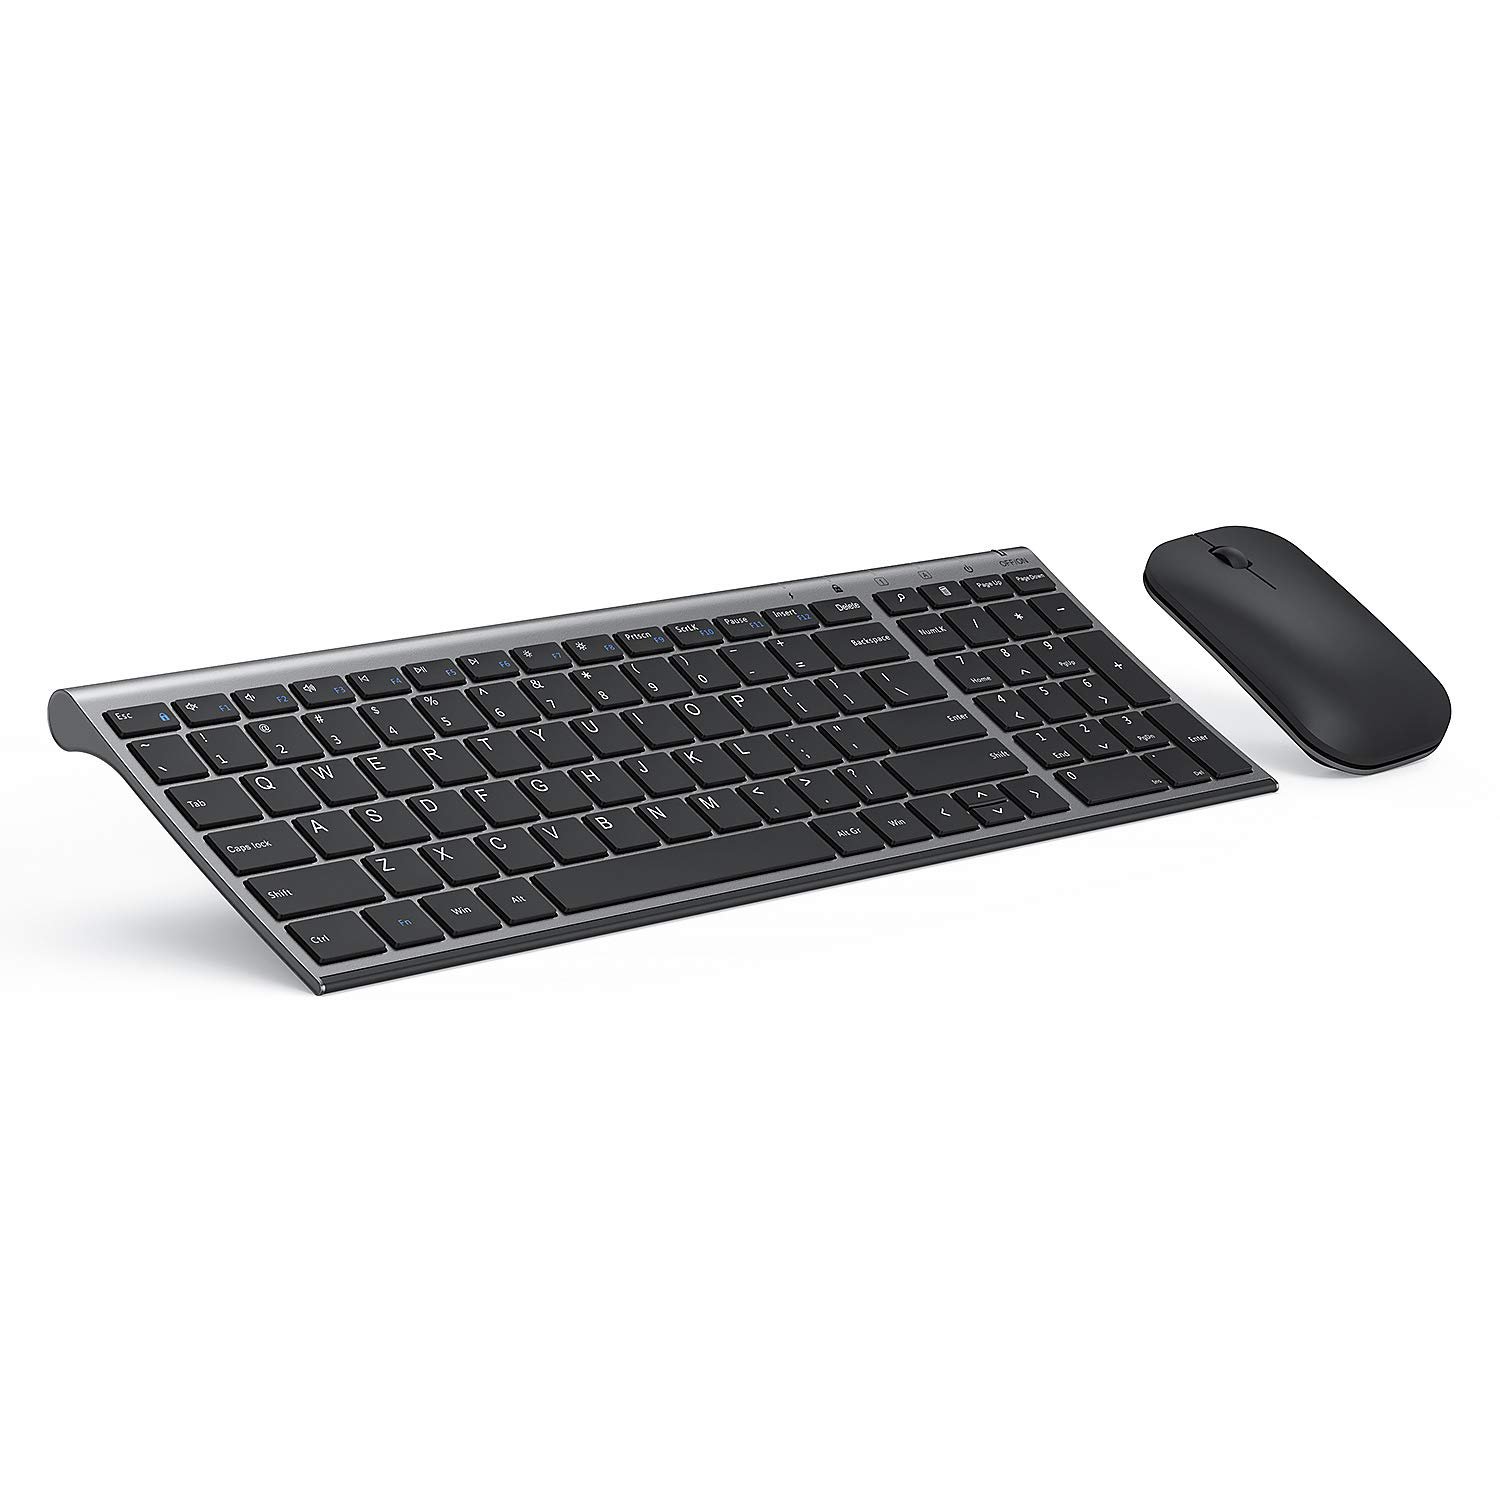 Rechargeable Wireless Keyboard Mouse, seenda Slim Thin Low Profile Keyboard and Mouse Combo with N